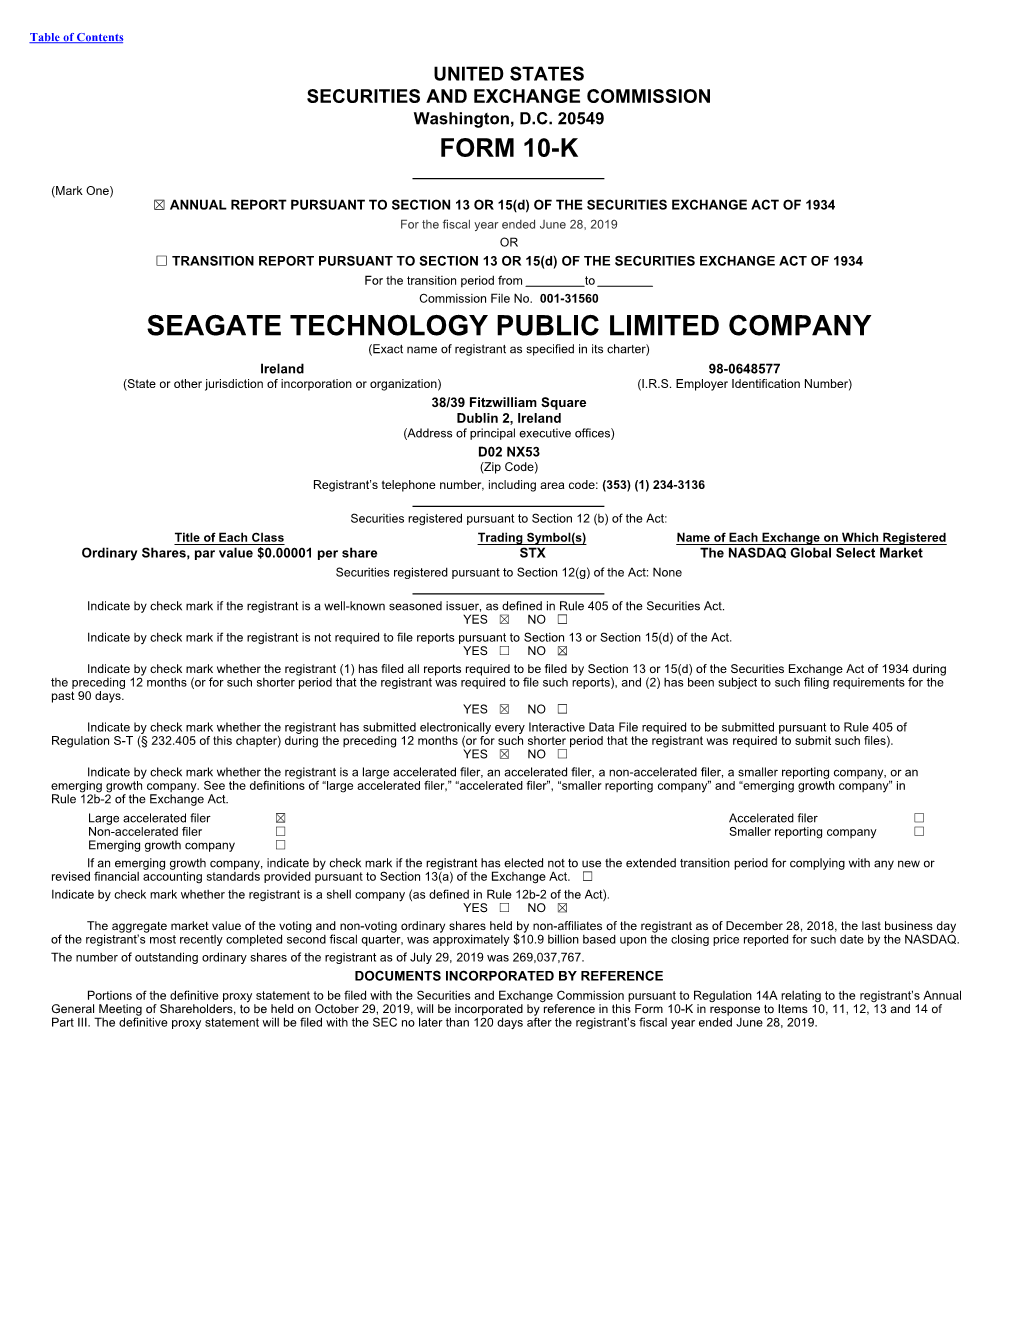 SEAGATE TECHNOLOGY PUBLIC LIMITED COMPANY (Exact Name of Registrant As Specified in Its Charter)